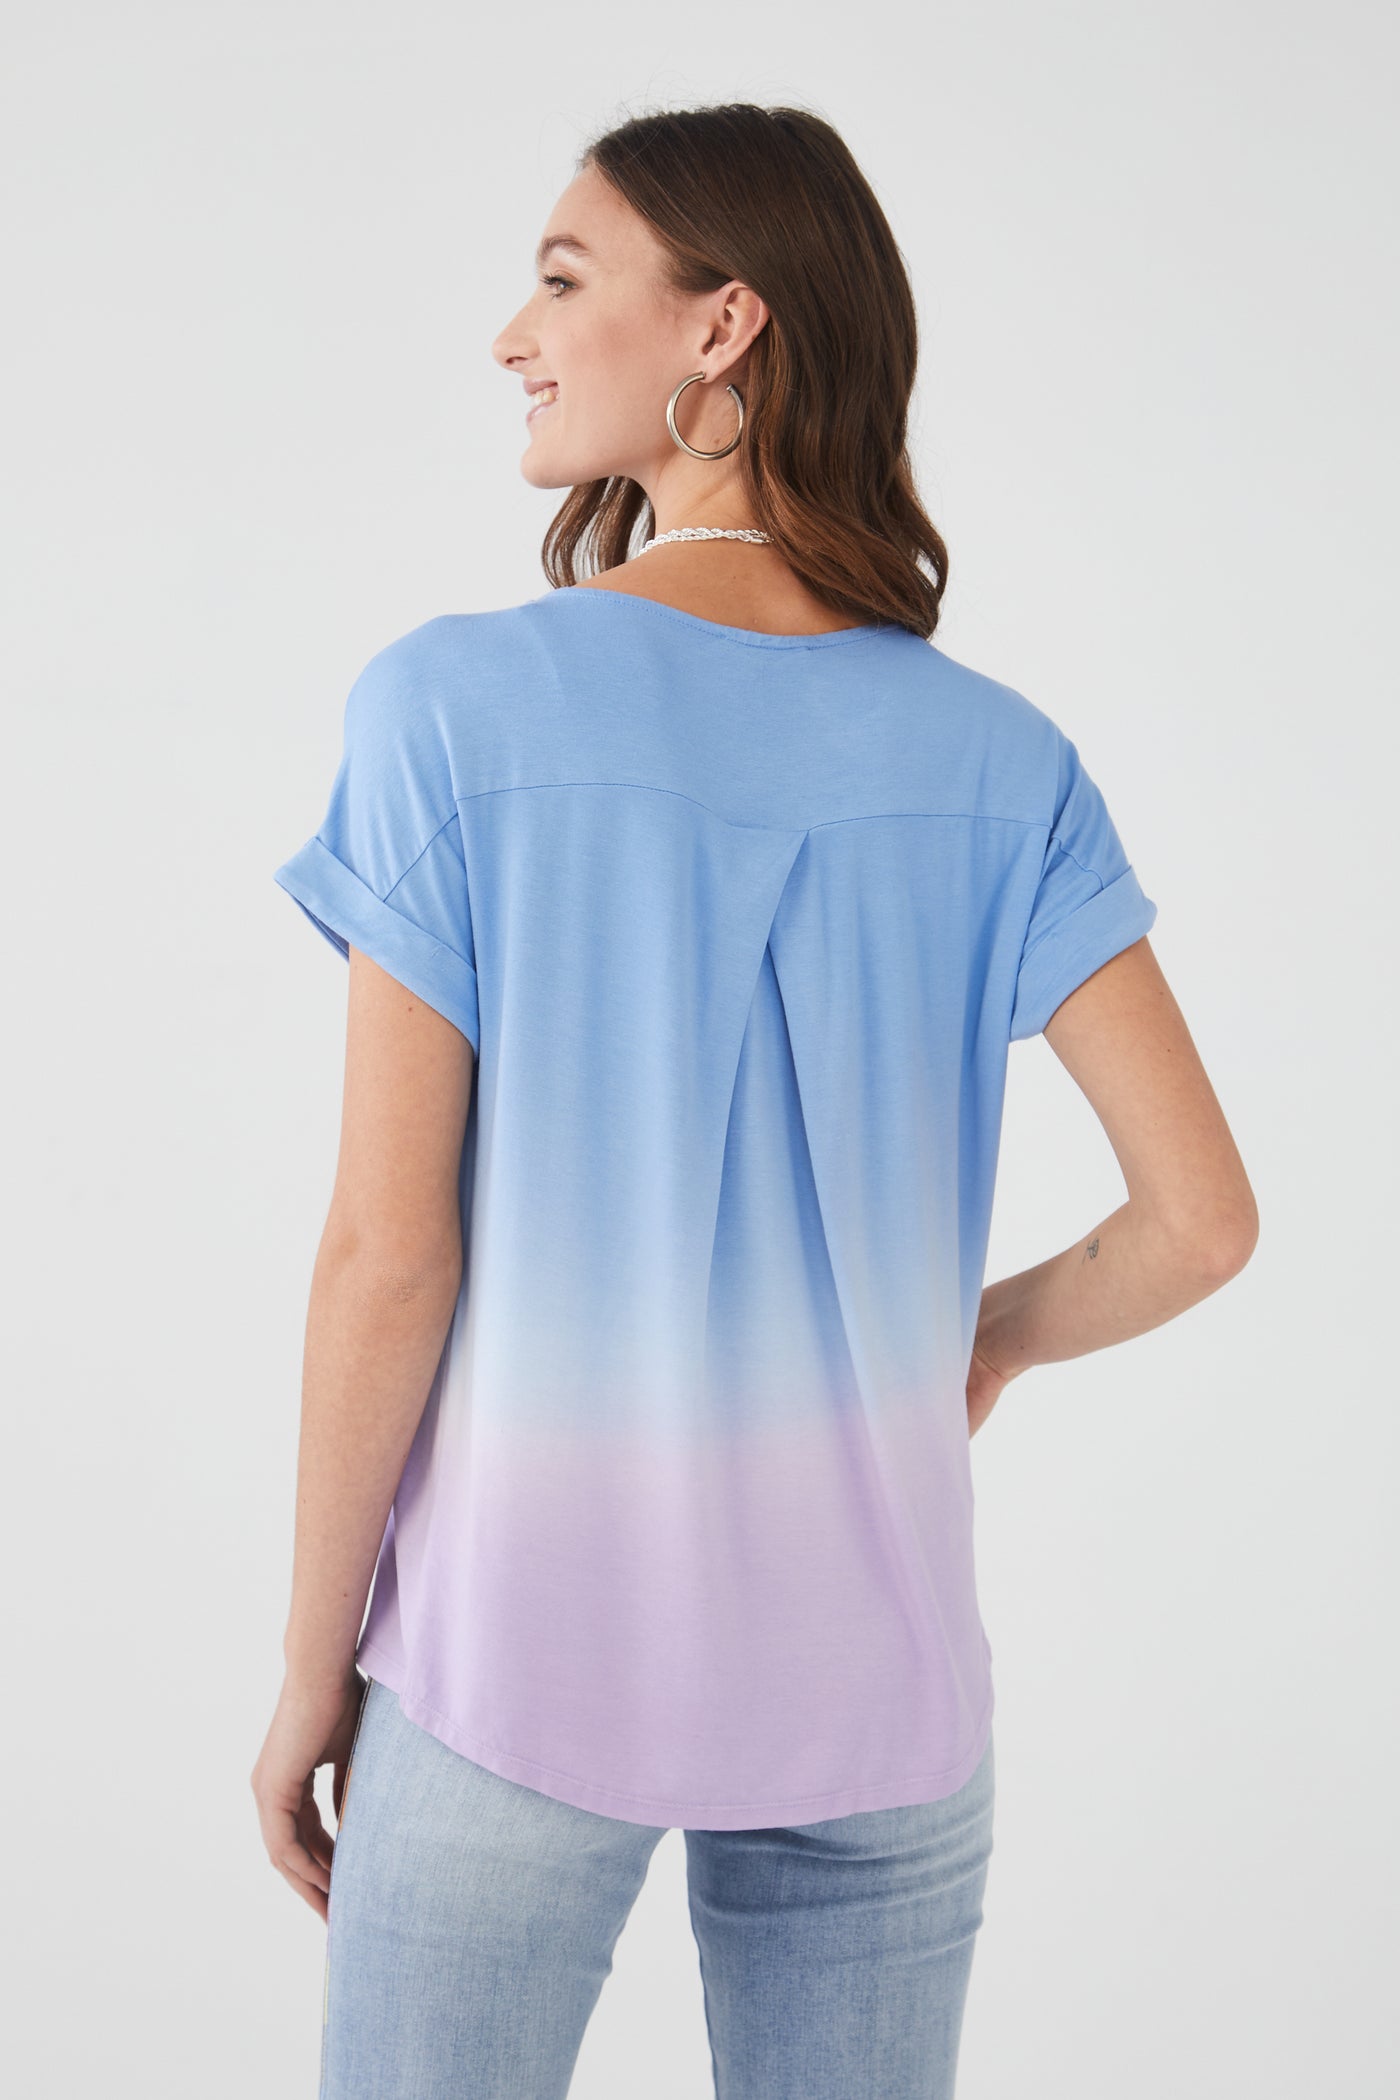 Dip Dyed Boatneck Top - Wild Pansy